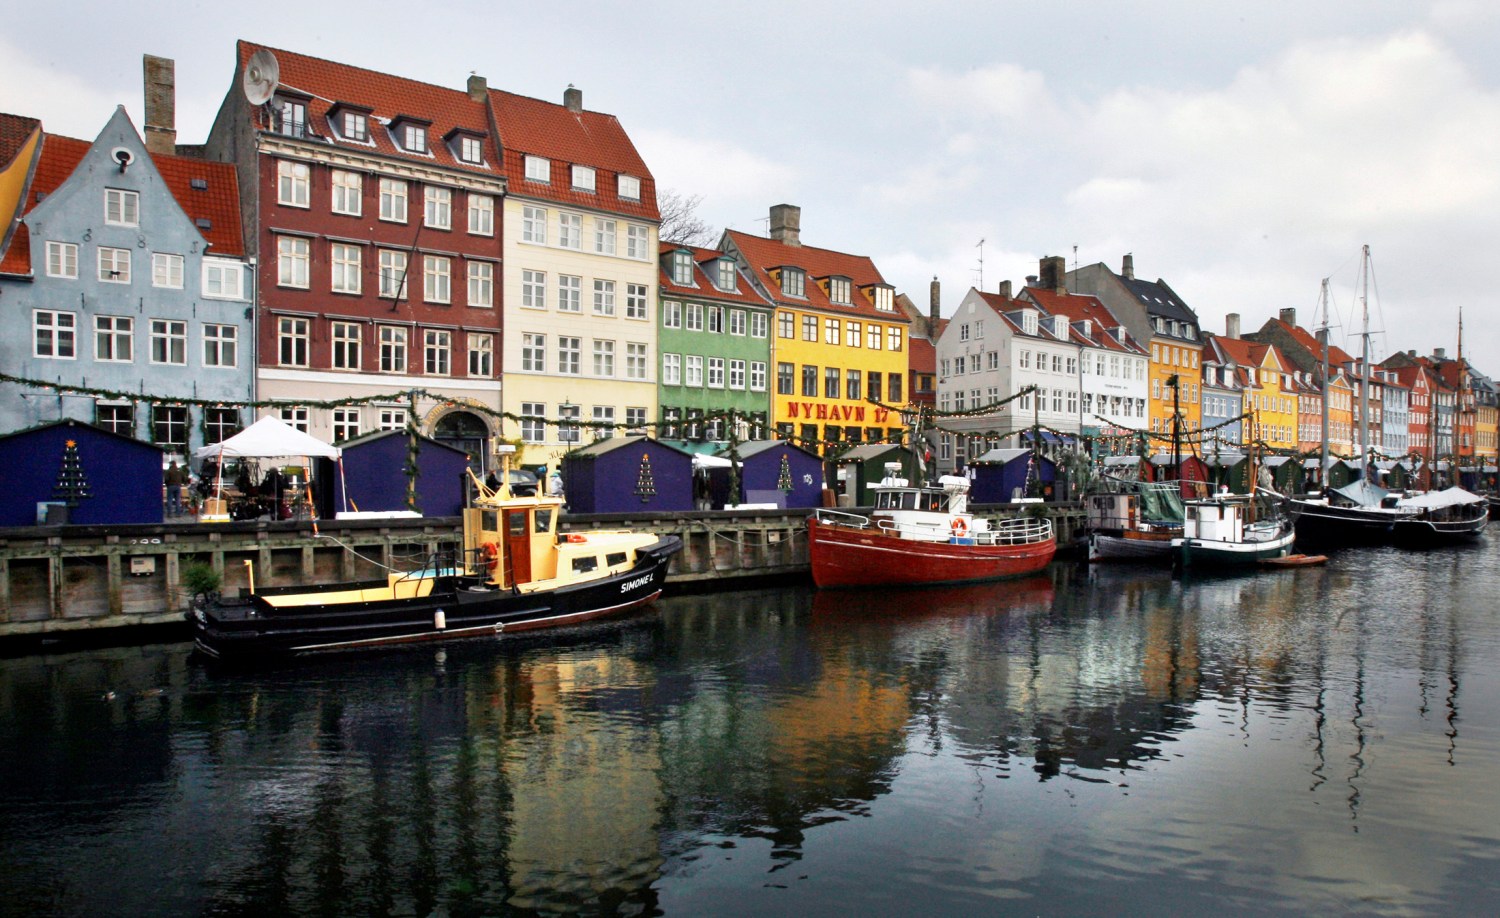 Boats are seen anchored at the 17th century Nyhavn district, home to many shops and restaurants in Copenhagen